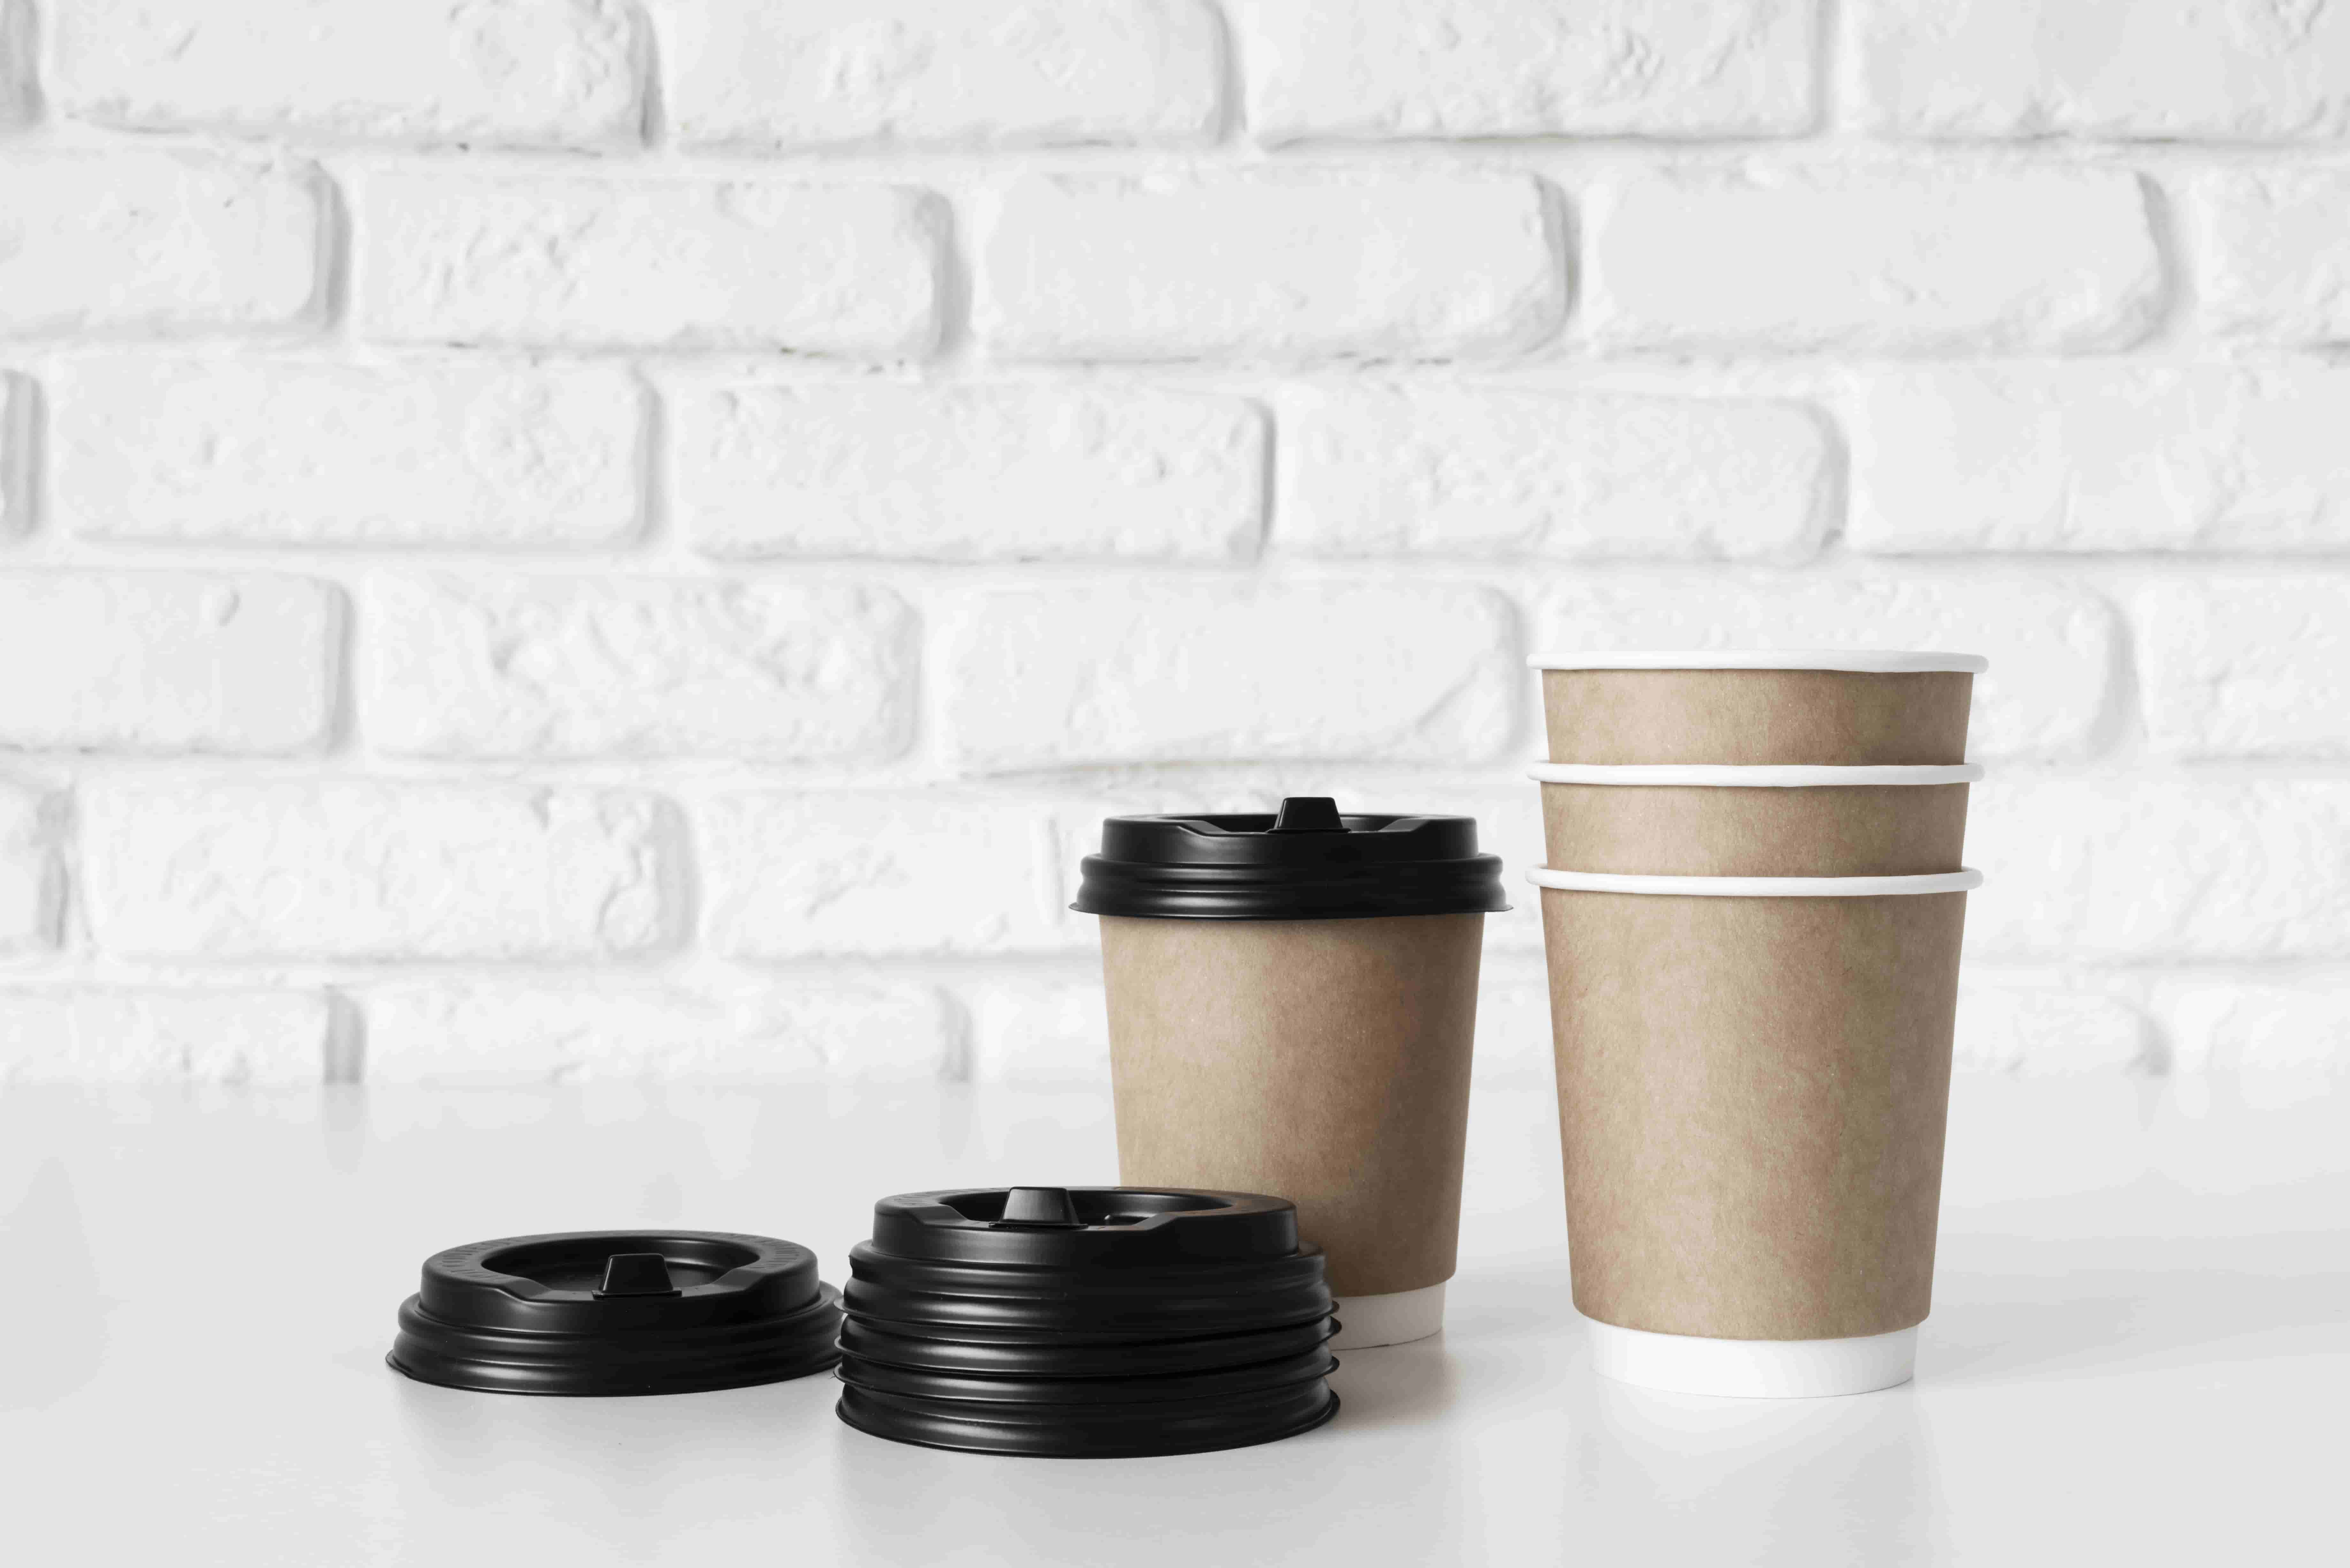 https://www.tuobopackaging.com/disposable-coffee-cups-with-lids-custom/